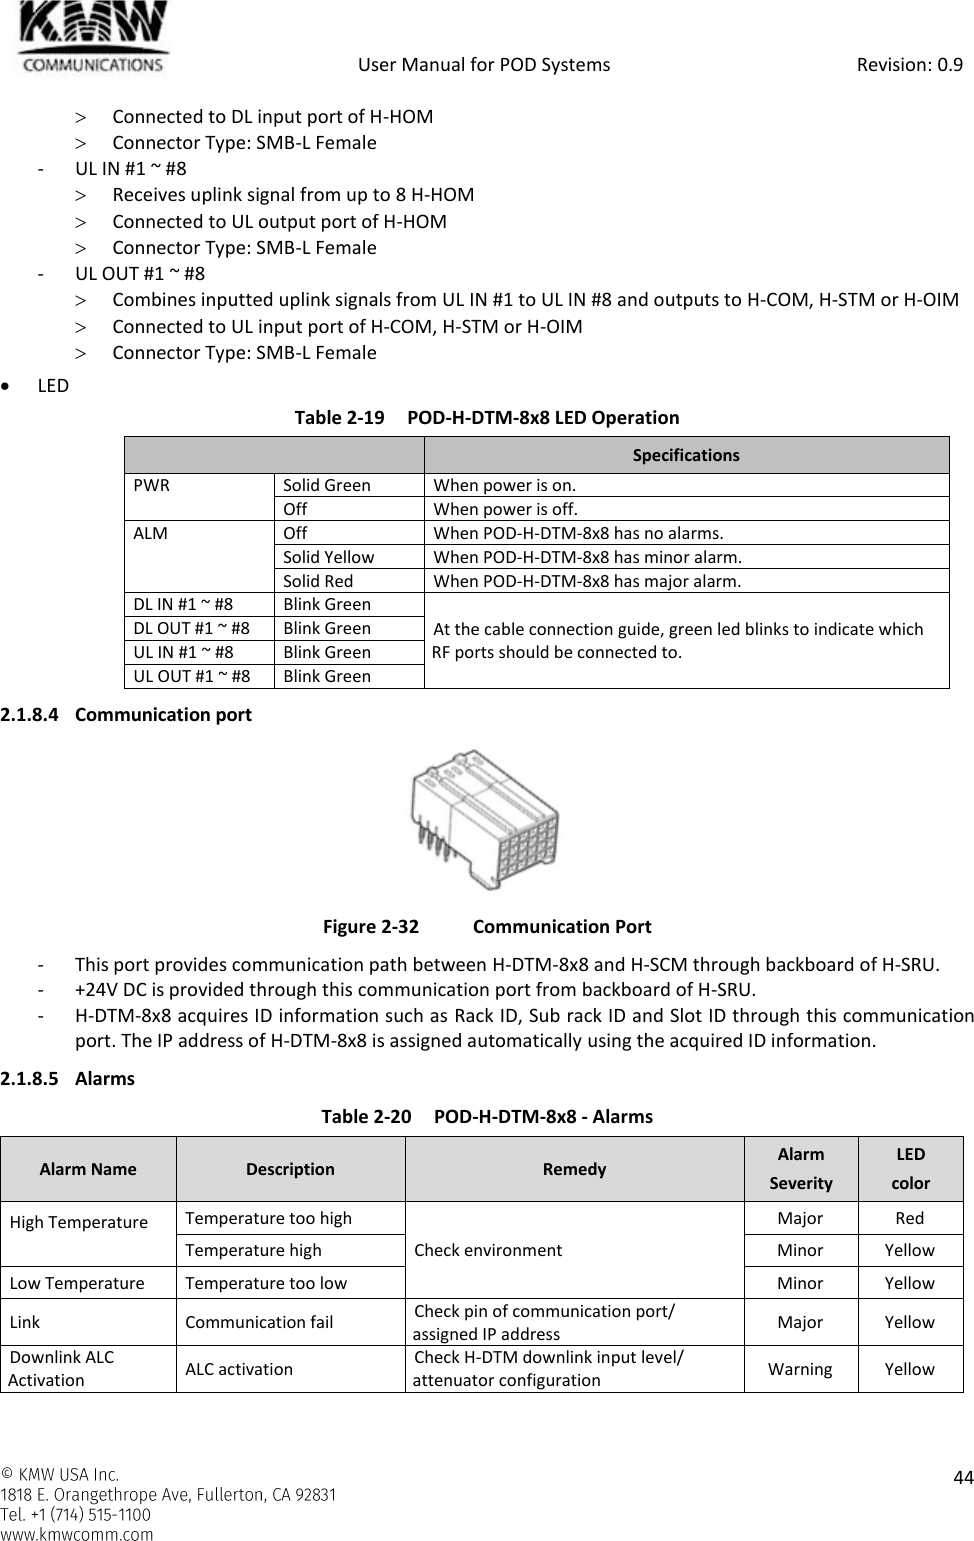            User Manual for POD Systems                                                     Revision: 0.9    44   Connected to DL input port of H-HOM  Connector Type: SMB-L Female - UL IN #1 ~ #8  Receives uplink signal from up to 8 H-HOM  Connected to UL output port of H-HOM  Connector Type: SMB-L Female - UL OUT #1 ~ #8  Combines inputted uplink signals from UL IN #1 to UL IN #8 and outputs to H-COM, H-STM or H-OIM  Connected to UL input port of H-COM, H-STM or H-OIM  Connector Type: SMB-L Female  LED Table 2-19 POD-H-DTM-8x8 LED Operation  Specifications PWR Solid Green When power is on. Off When power is off. ALM Off When POD-H-DTM-8x8 has no alarms. Solid Yellow When POD-H-DTM-8x8 has minor alarm. Solid Red When POD-H-DTM-8x8 has major alarm. DL IN #1 ~ #8 Blink Green At the cable connection guide, green led blinks to indicate which RF ports should be connected to. DL OUT #1 ~ #8 Blink Green UL IN #1 ~ #8 Blink Green UL OUT #1 ~ #8 Blink Green 2.1.8.4 Communication port  Figure 2-32  Communication Port - This port provides communication path between H-DTM-8x8 and H-SCM through backboard of H-SRU. - +24V DC is provided through this communication port from backboard of H-SRU. - H-DTM-8x8 acquires ID information such as Rack ID, Sub rack ID and Slot ID through this communication port. The IP address of H-DTM-8x8 is assigned automatically using the acquired ID information. 2.1.8.5 Alarms Table 2-20 POD-H-DTM-8x8 - Alarms Alarm Name Description Remedy Alarm Severity LED color High Temperature  Temperature too high Check environment Major Red Temperature high Minor Yellow Low Temperature Temperature too low Minor Yellow Link Communication fail Check pin of communication port/ assigned IP address Major Yellow Downlink ALC Activation ALC activation Check H-DTM downlink input level/ attenuator configuration Warning Yellow   